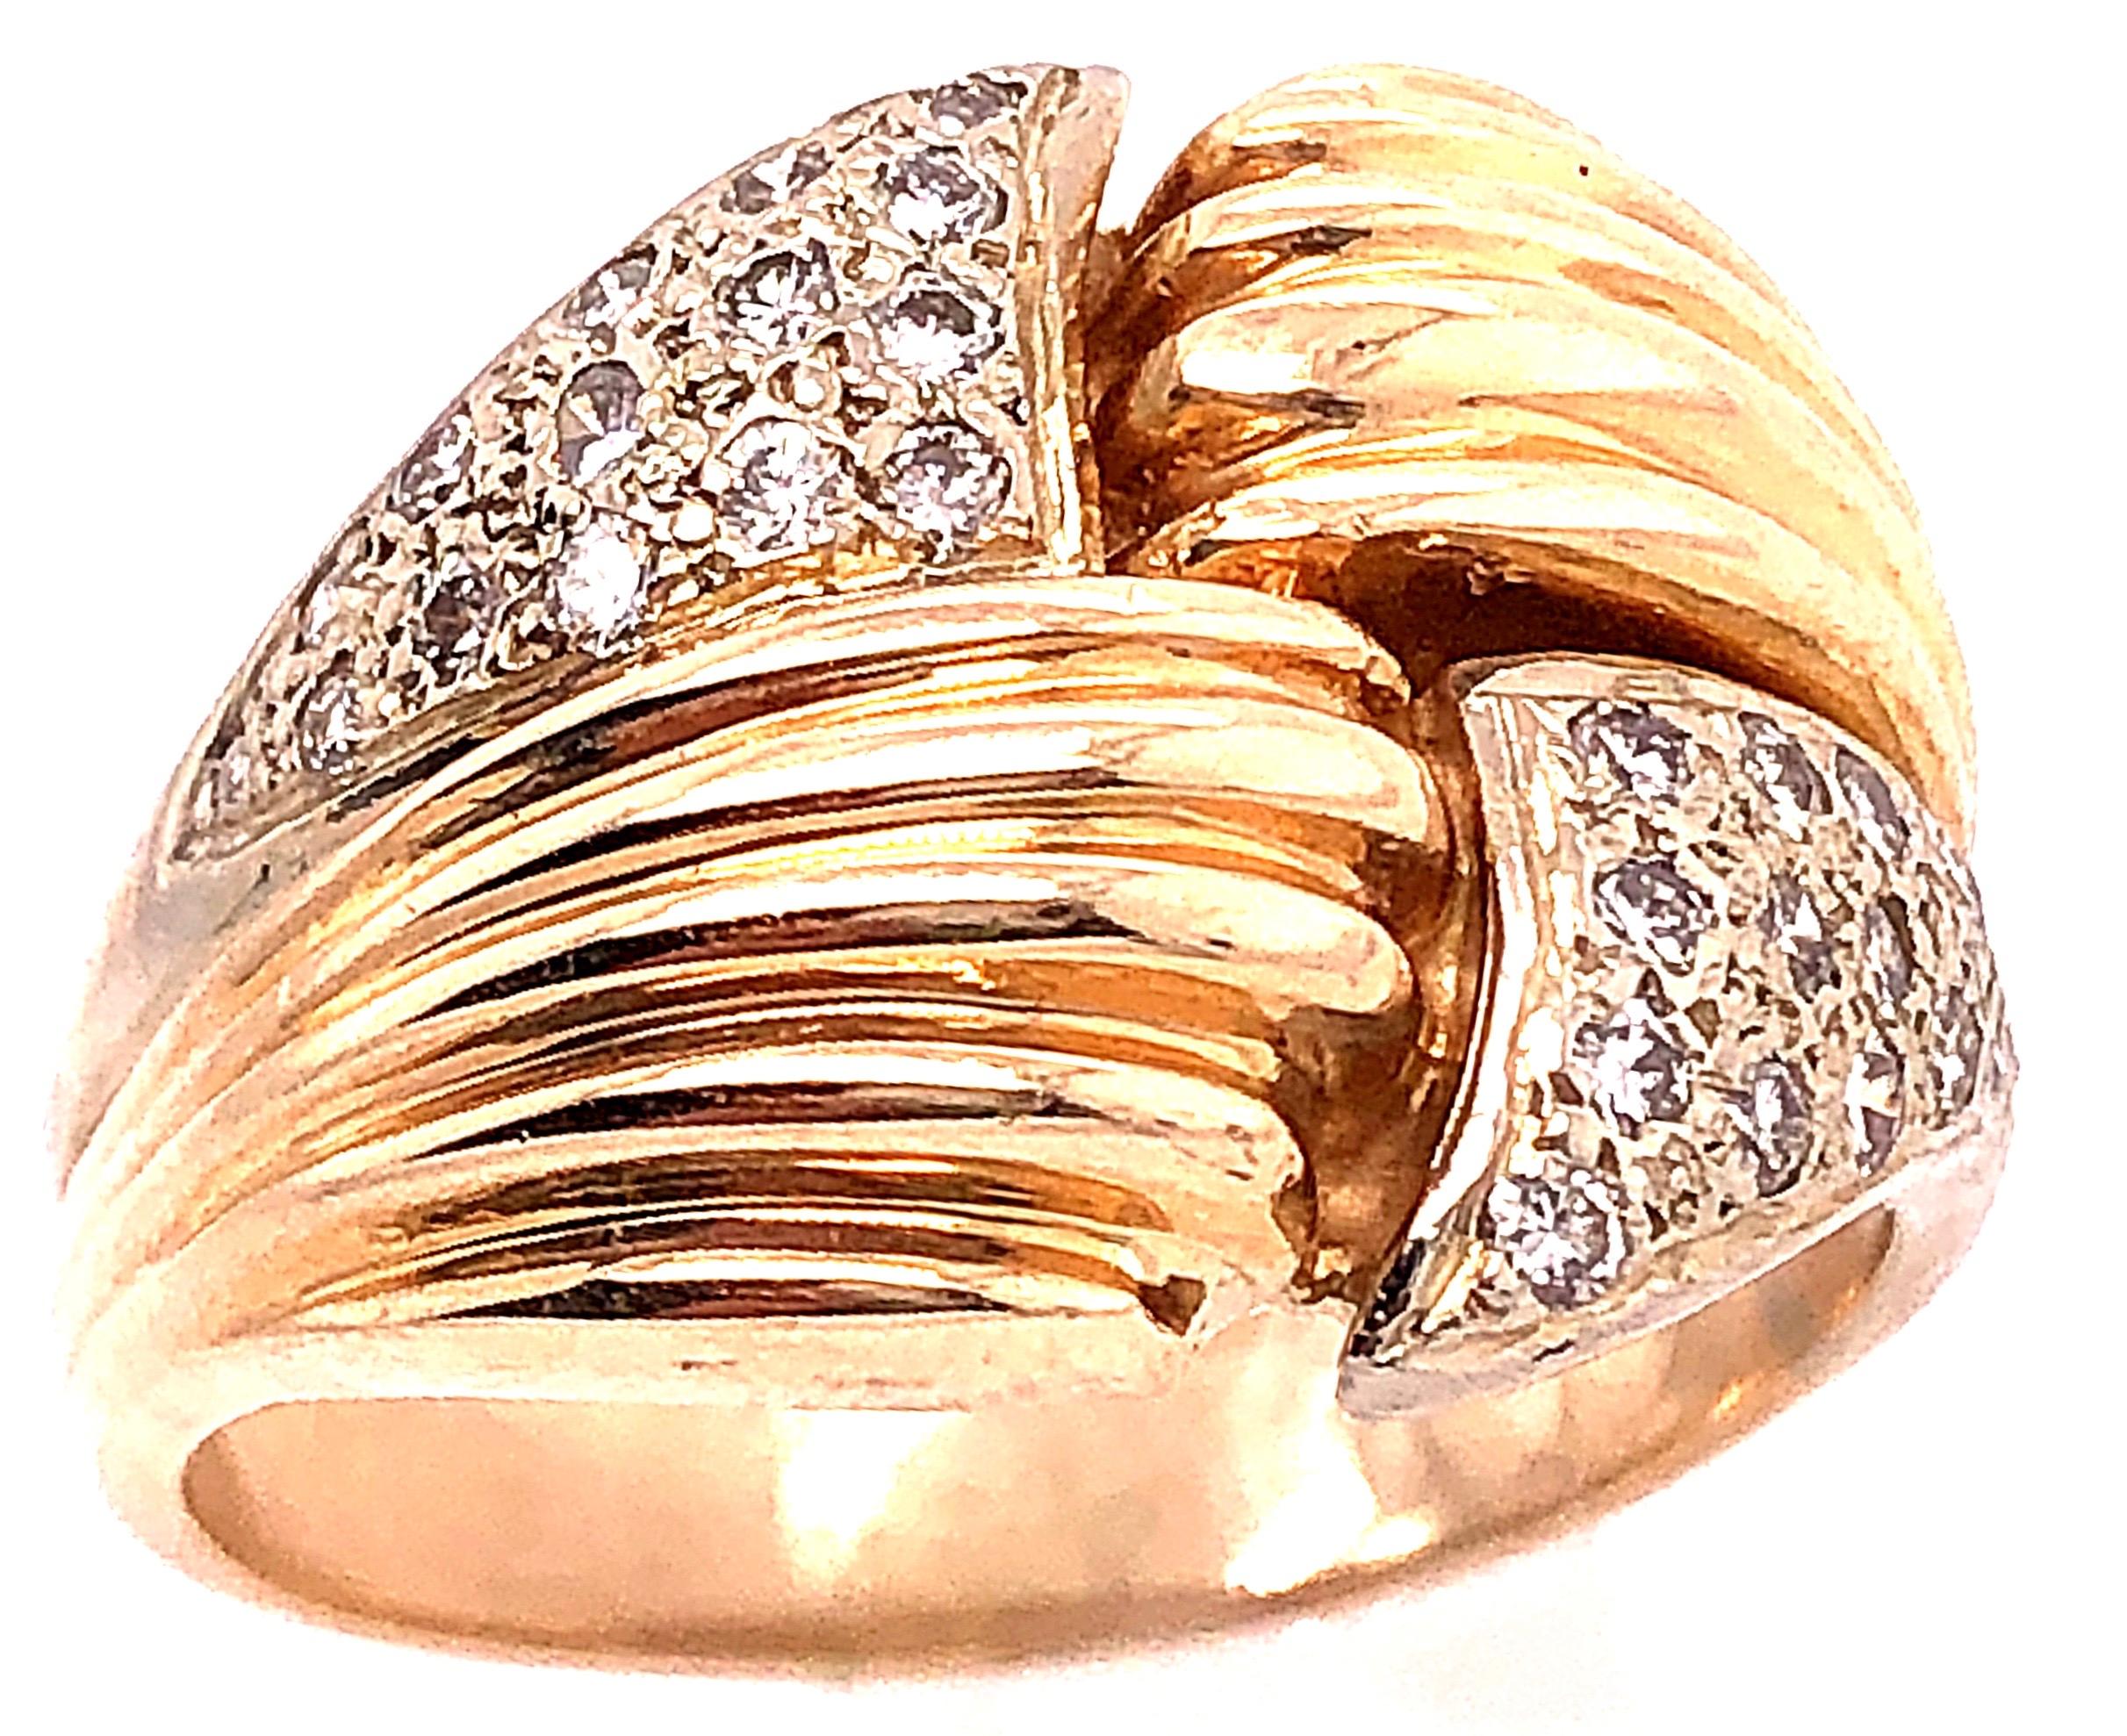 14 Karat Two Tone Yellow and White Gold Fashion Ring with Cubic Zircon.
30 piece round zircons.
9.45 grams total weight.
Size 8.25

